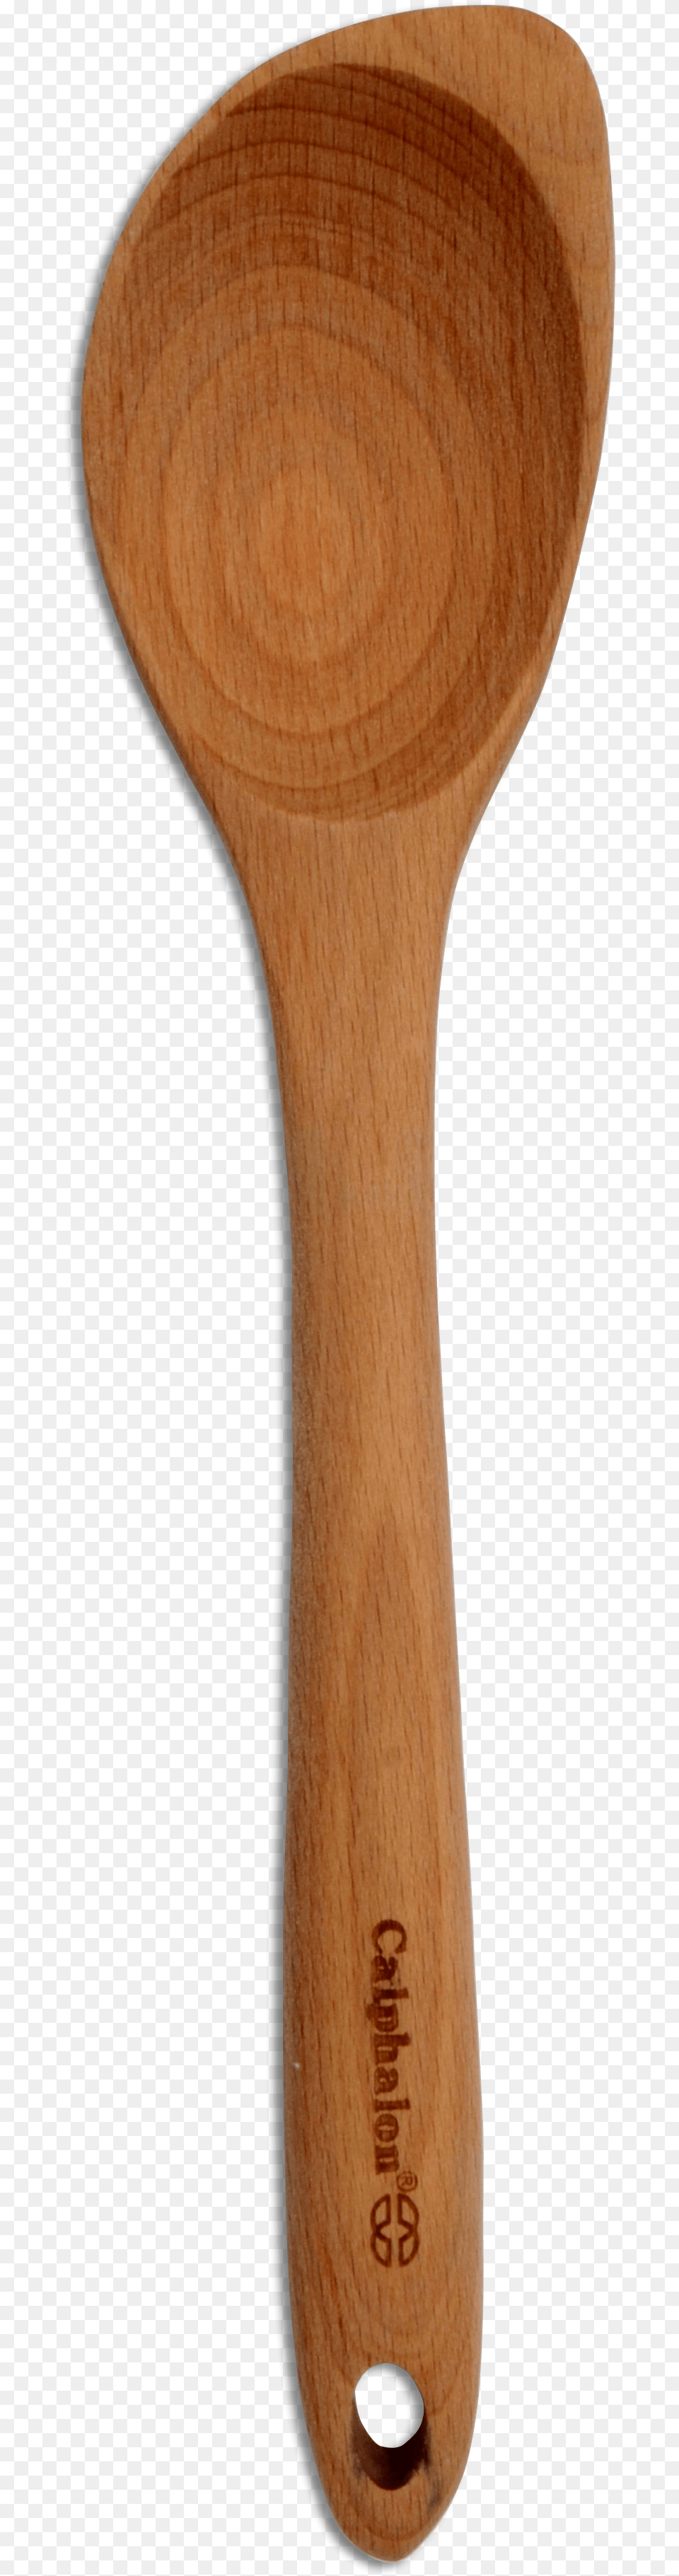 Calphalon Corner Spoon Brown Wooden Spoon, Cutlery, Kitchen Utensil, Wooden Spoon, Ping Pong Png